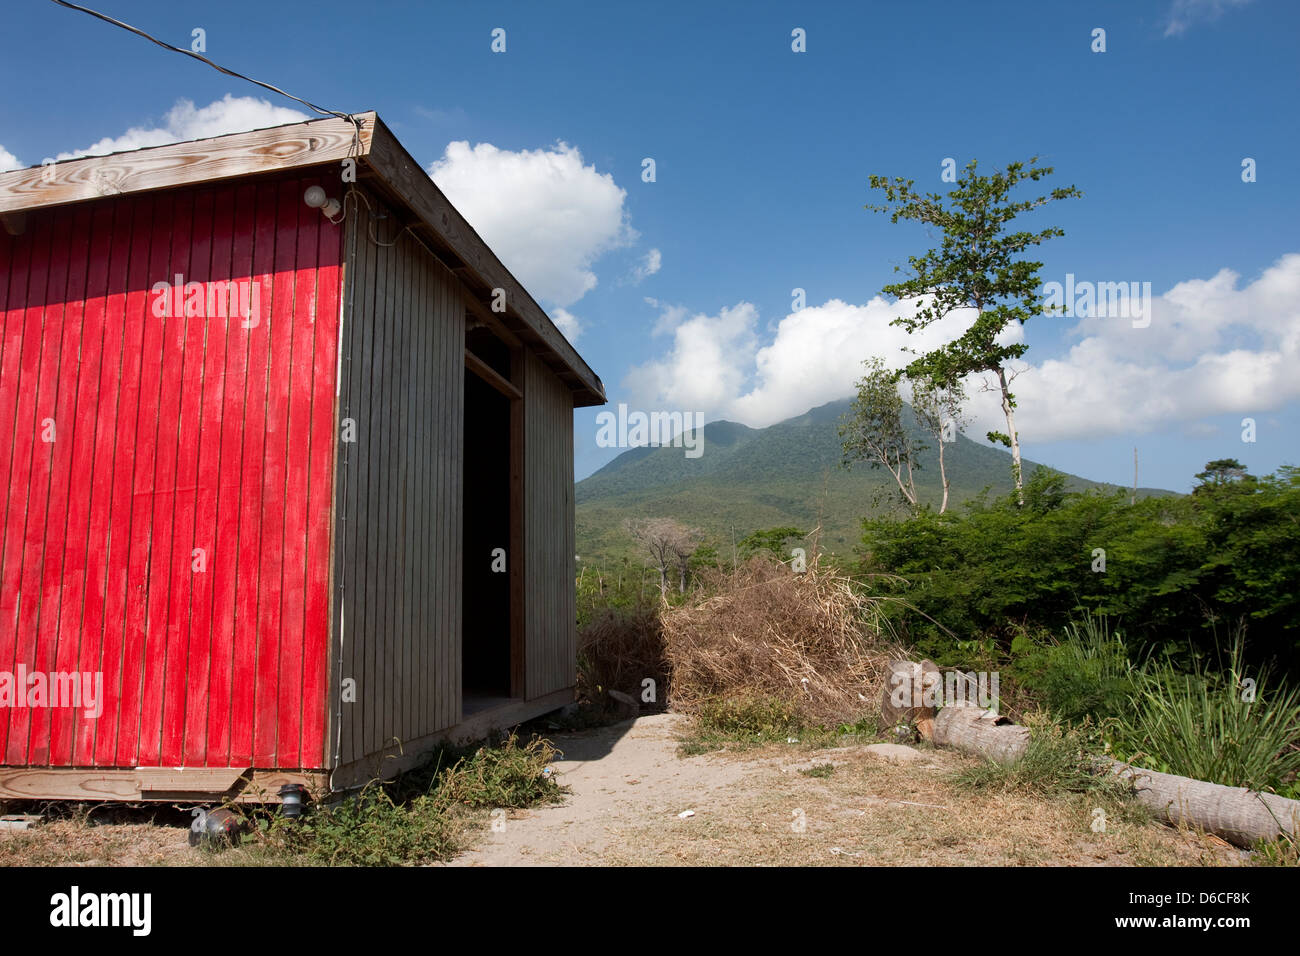 Nevis Peak in the distance beyond a red painted wood shed on the Caribbean island Stock Photo